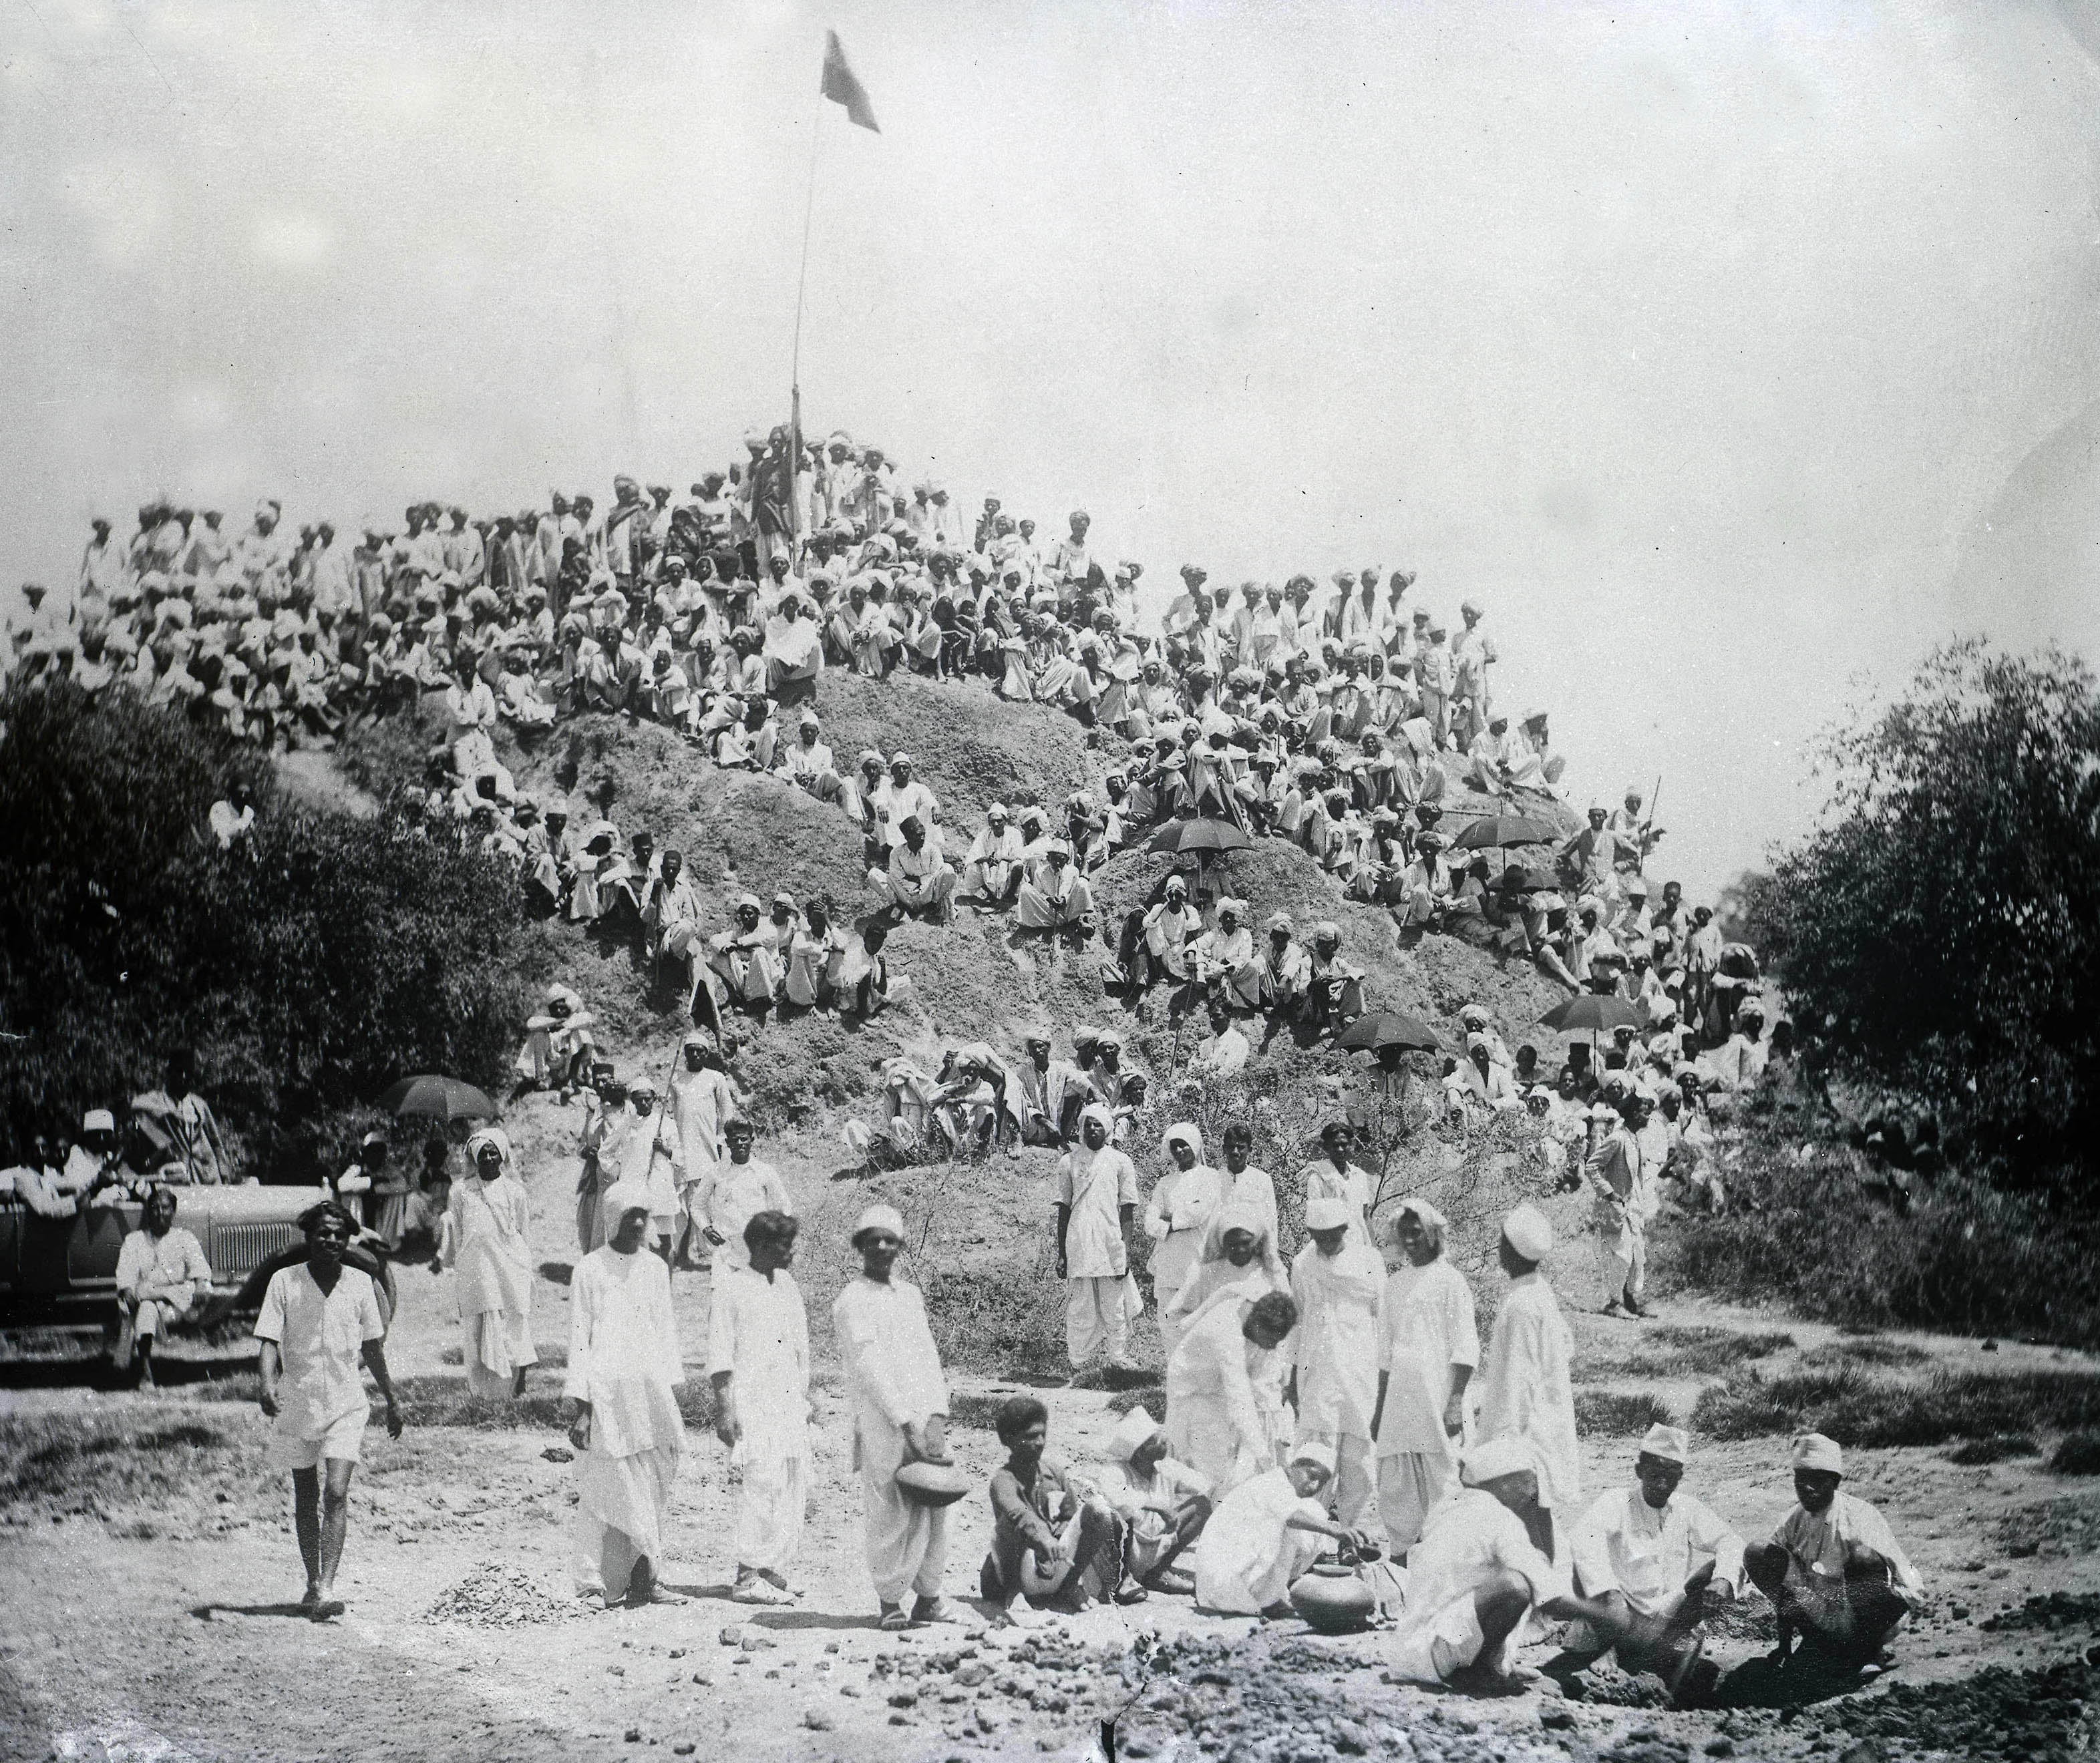 Protestors watching members of their band making salt following the civil disobedience riots and demonstrations demanding the boycotting of British goods and the arrest of leader Mahatma Gandhi in Kapadwamj, India on May 6, 1930. (Popperfoto&mdash;Getty Images)